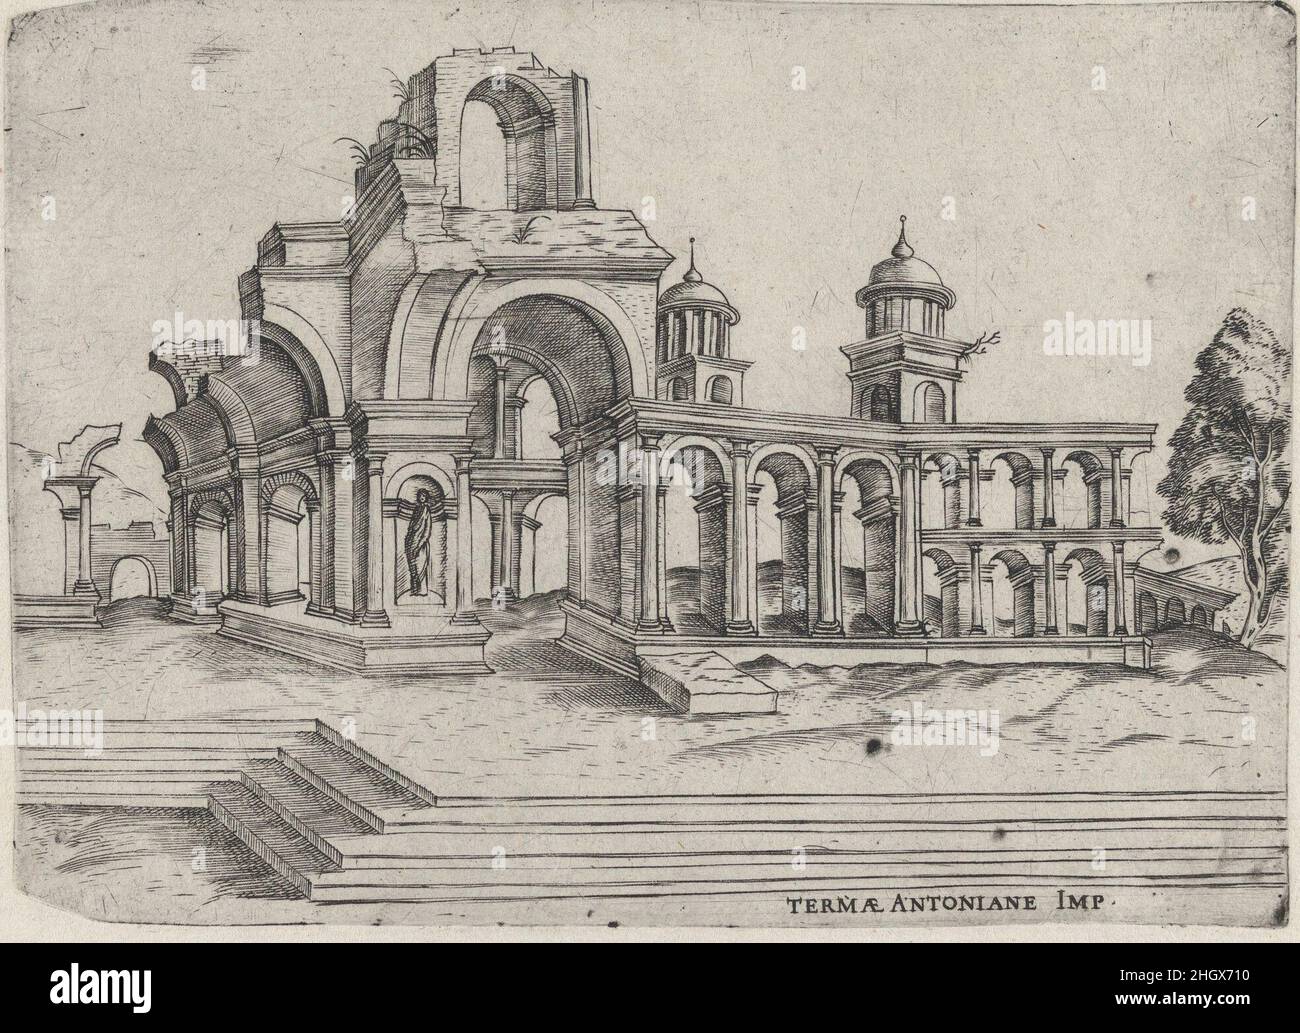 Termae Antoniane Imp. [formerly Palatium Se Lugduni], from a Series of 24 Depicting (Reconstructed) Buildings from Roman Antiquity Plate ca. 1530–50 Anonymous, Italian, 16th century Perspectival view of a building in its ruined state, referred to here as the ‘Palatium Se Lugduni’, but changed in a later state to ‘Termae Anonianae Imp’. The latter, which refers to the complex now more generally known as the Baths of Caracalla may in fact be the correct identification of the source used for this print. This does not negate the fact that the printmaker may have intended to depict a Roman building Stock Photo